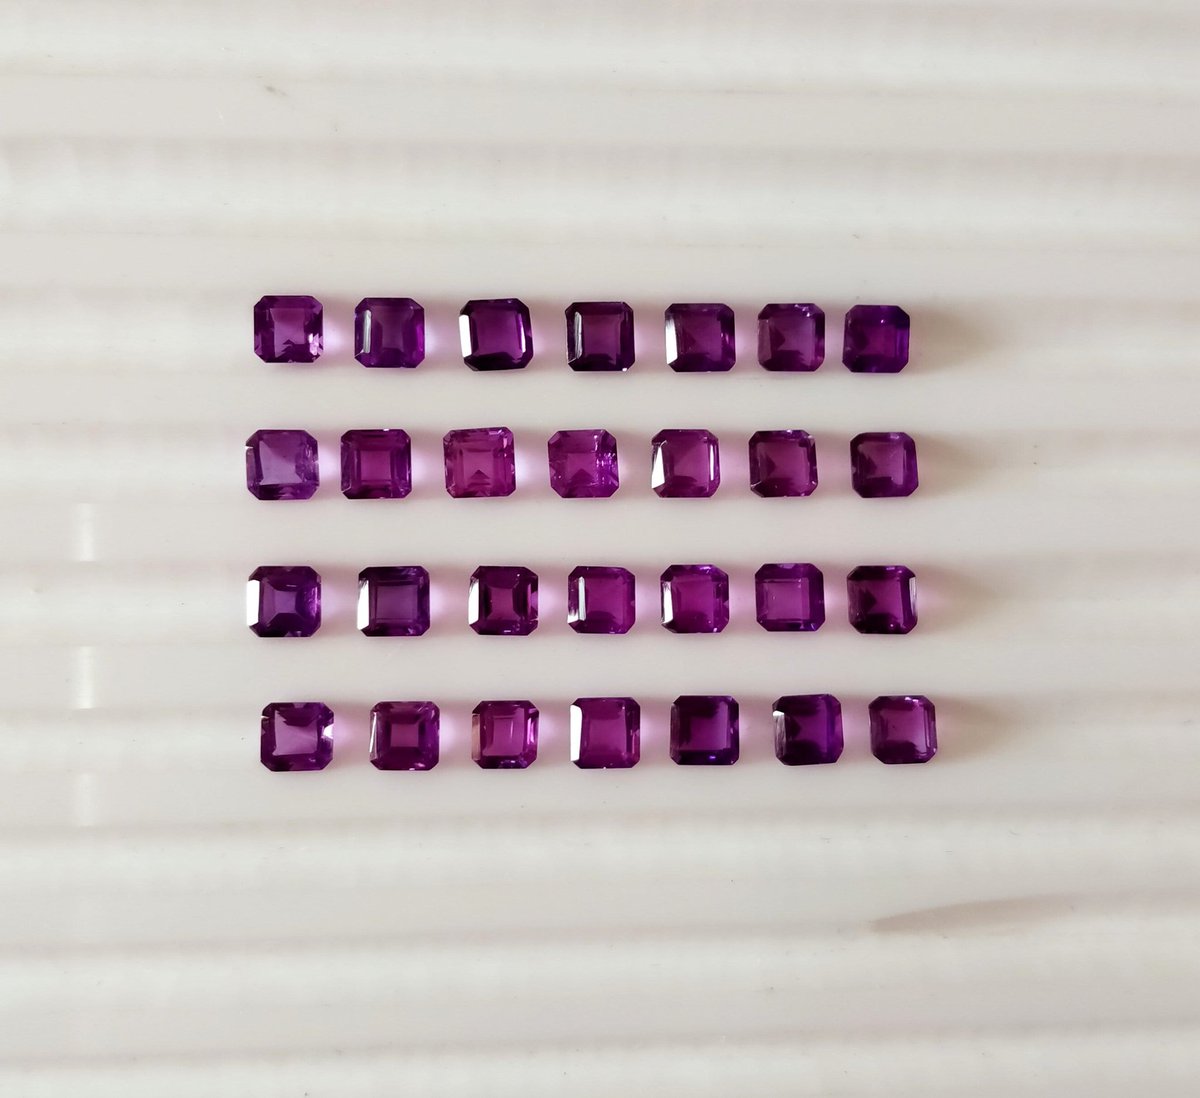 Excited to share the latest addition to my #etsyshop: natural African amethyst Asscher cut 4mm aaa quality lot of 5 pieces. #amethystloose #fancycutgemstone #gemforjewelry #asschercutgem #emeraldcut #amethysyoctagon #Canelo #اوراوا_الهلال #Bitcoin2023  etsy.me/3B2E27G